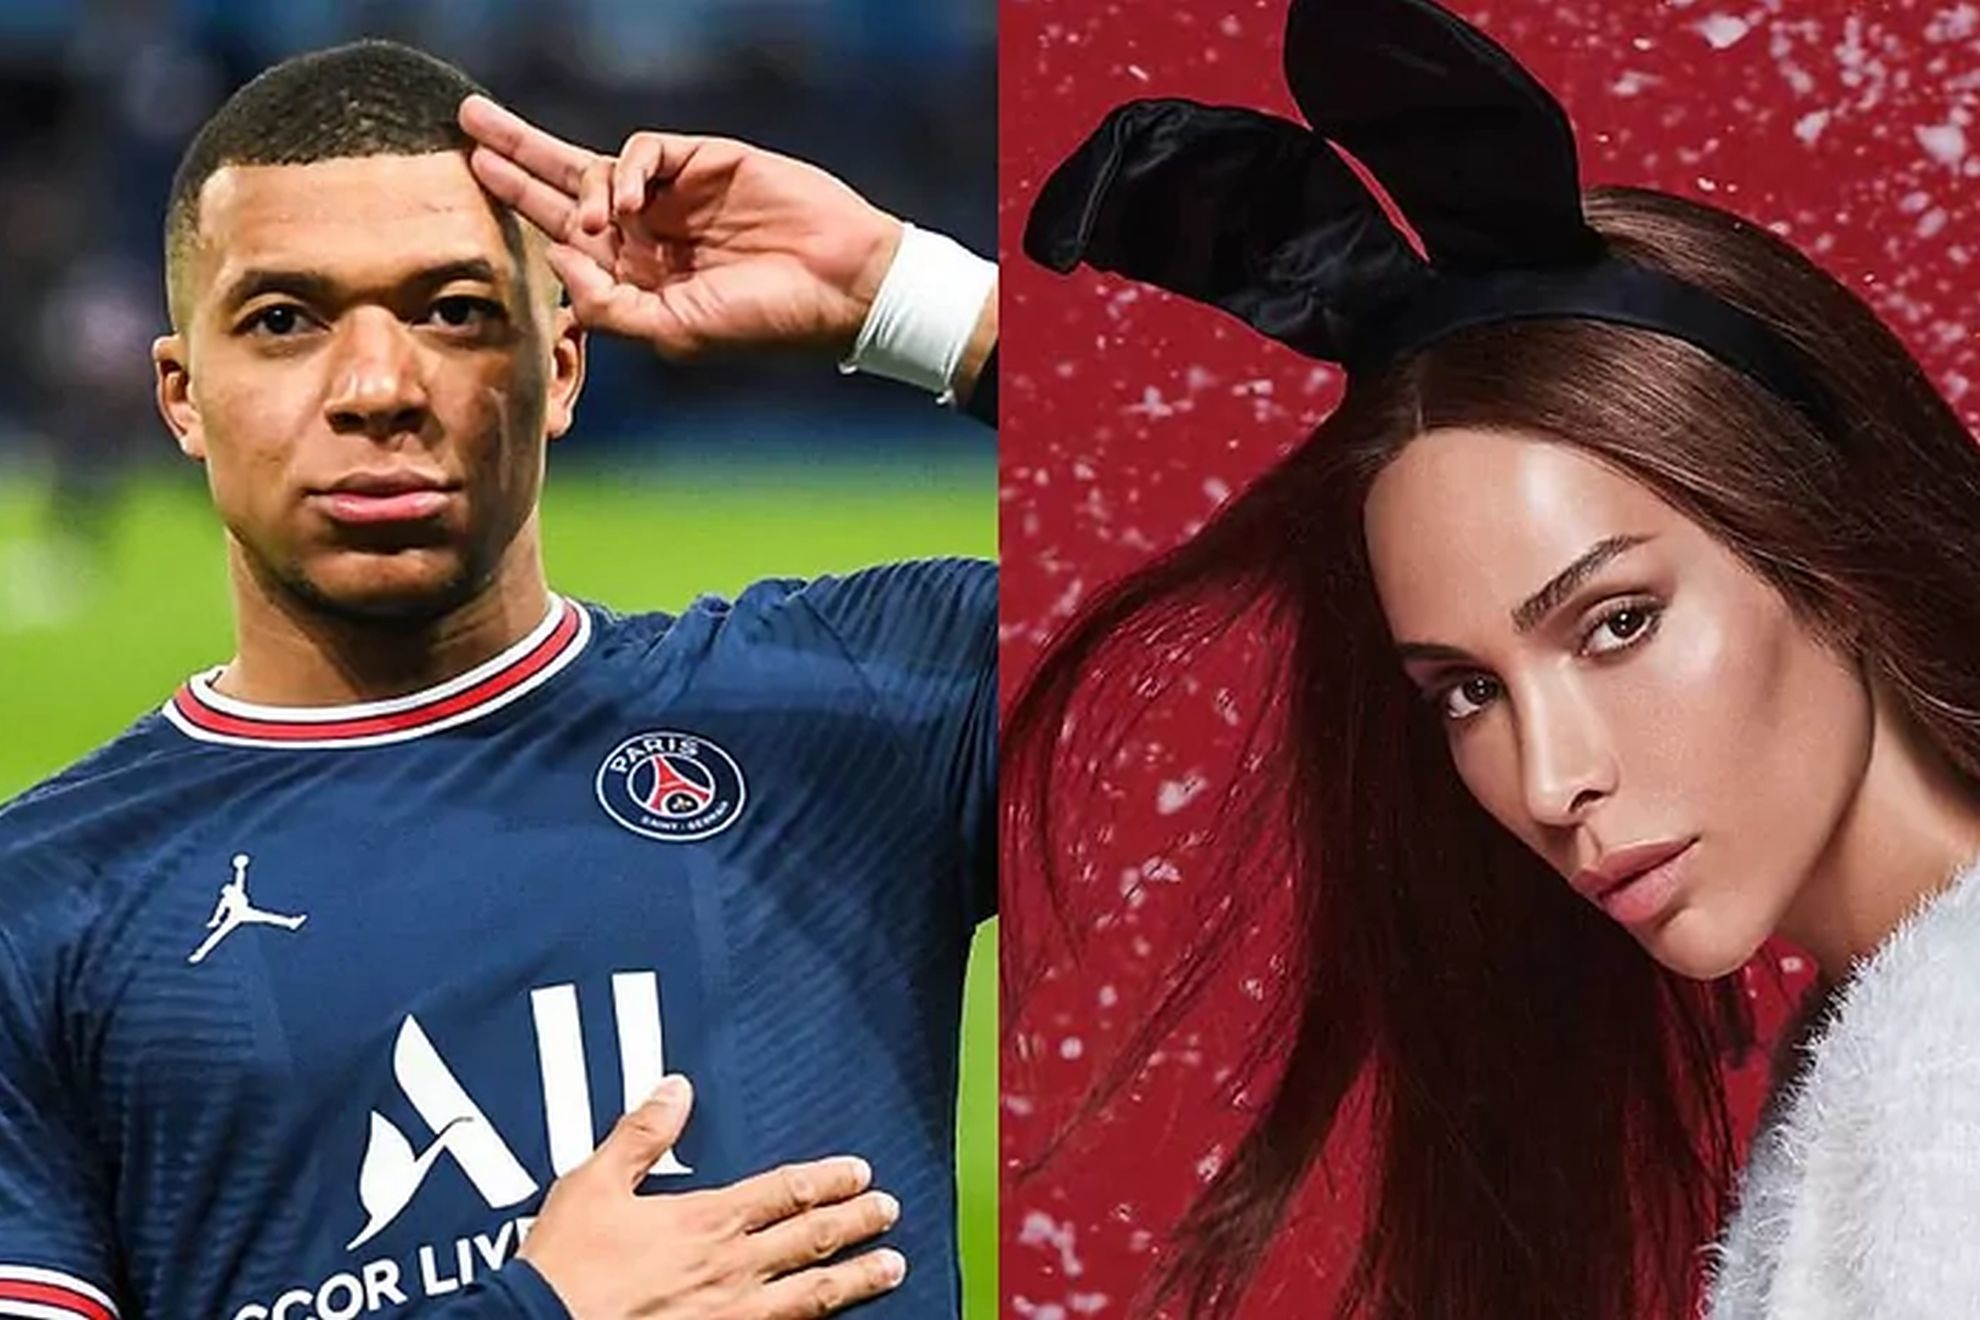 Mbappe splits from his trans girlfriend and starts dating the ex of a PSG player Marca